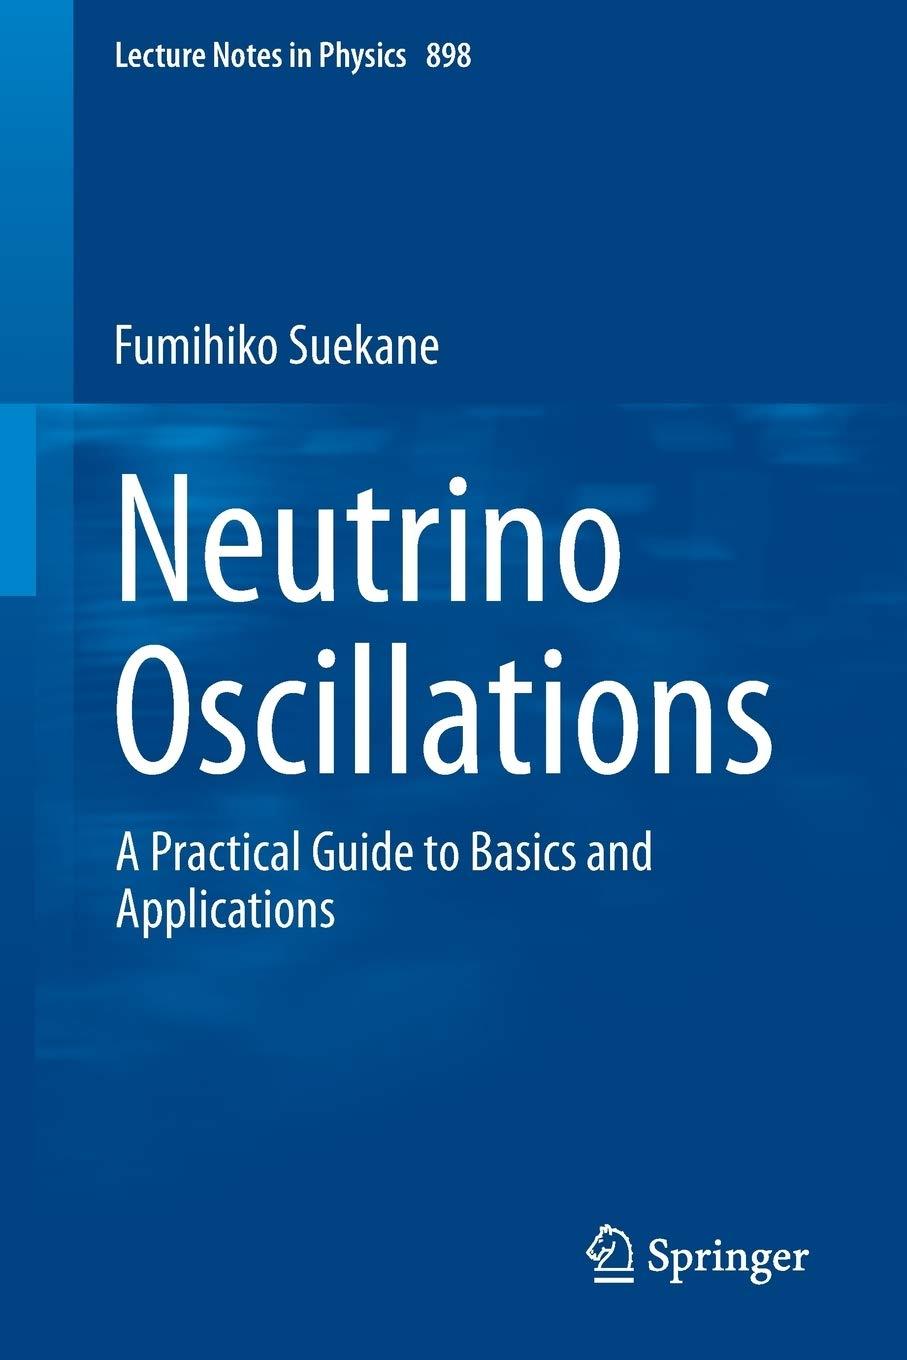 neutrino oscillations a practical guide to basics and applications 1st edition fumihiko suekane 4431554610,